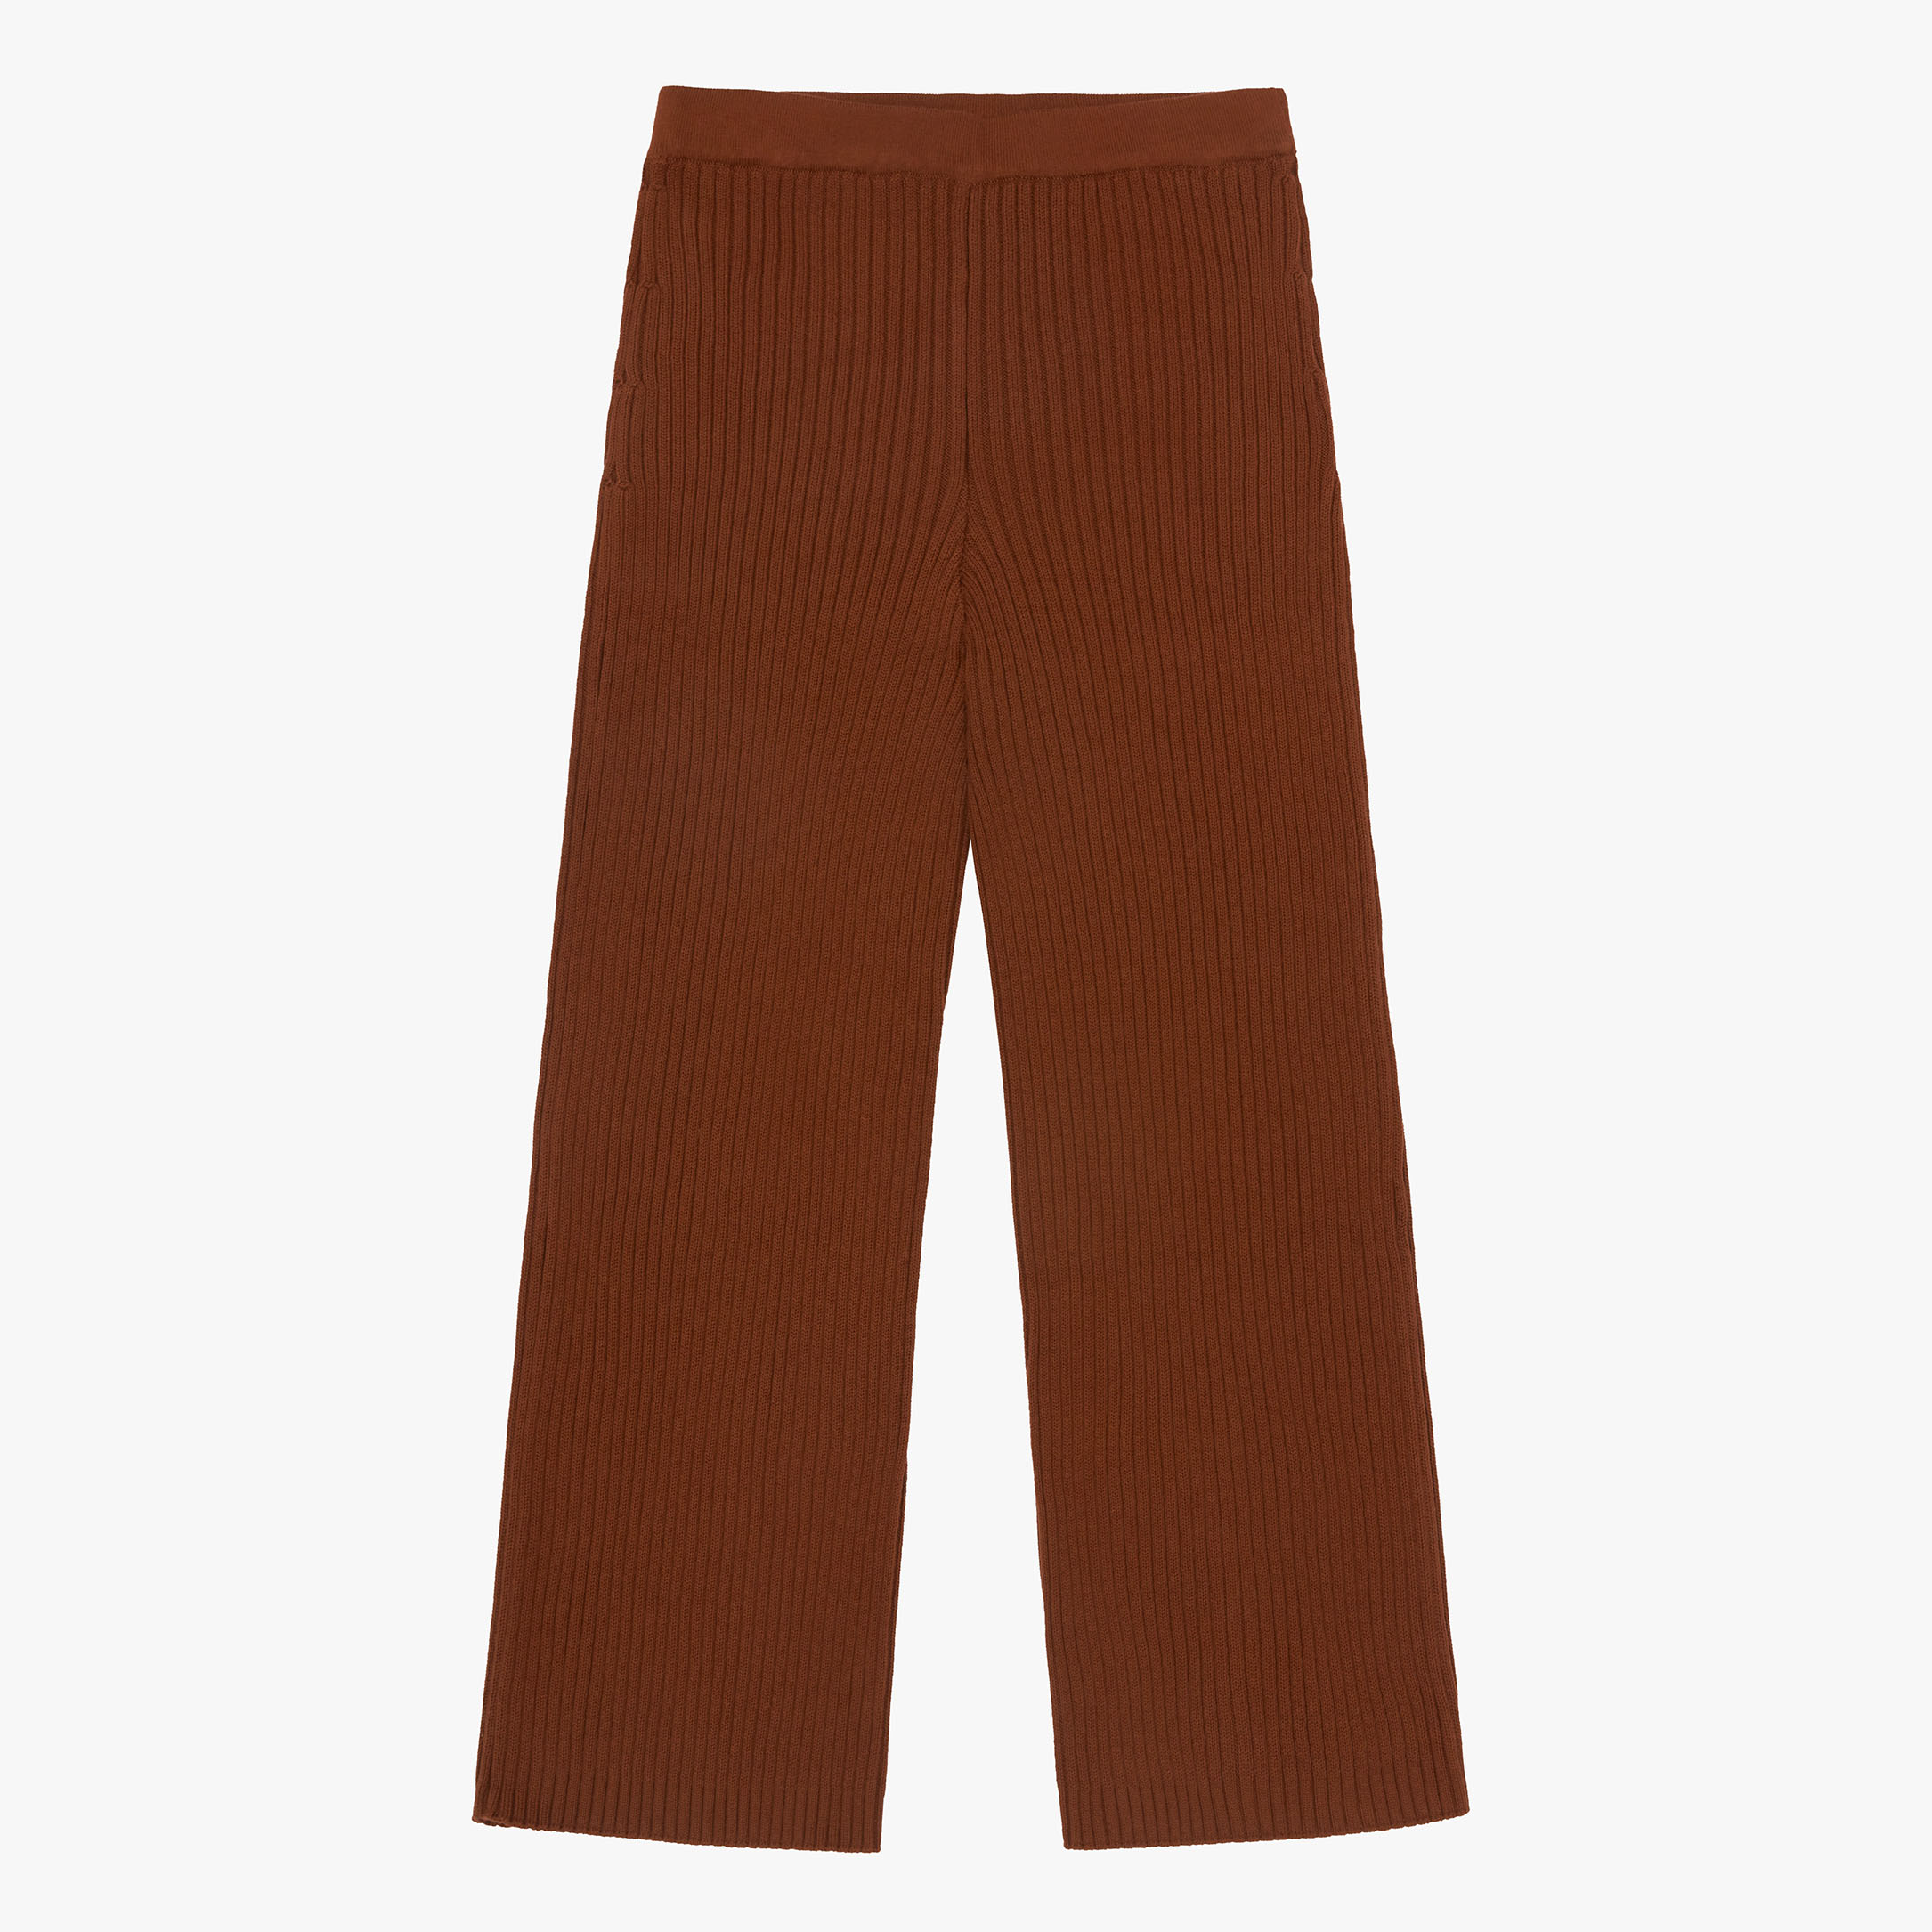 diarte-silvestre-knitted-cotton-trousers